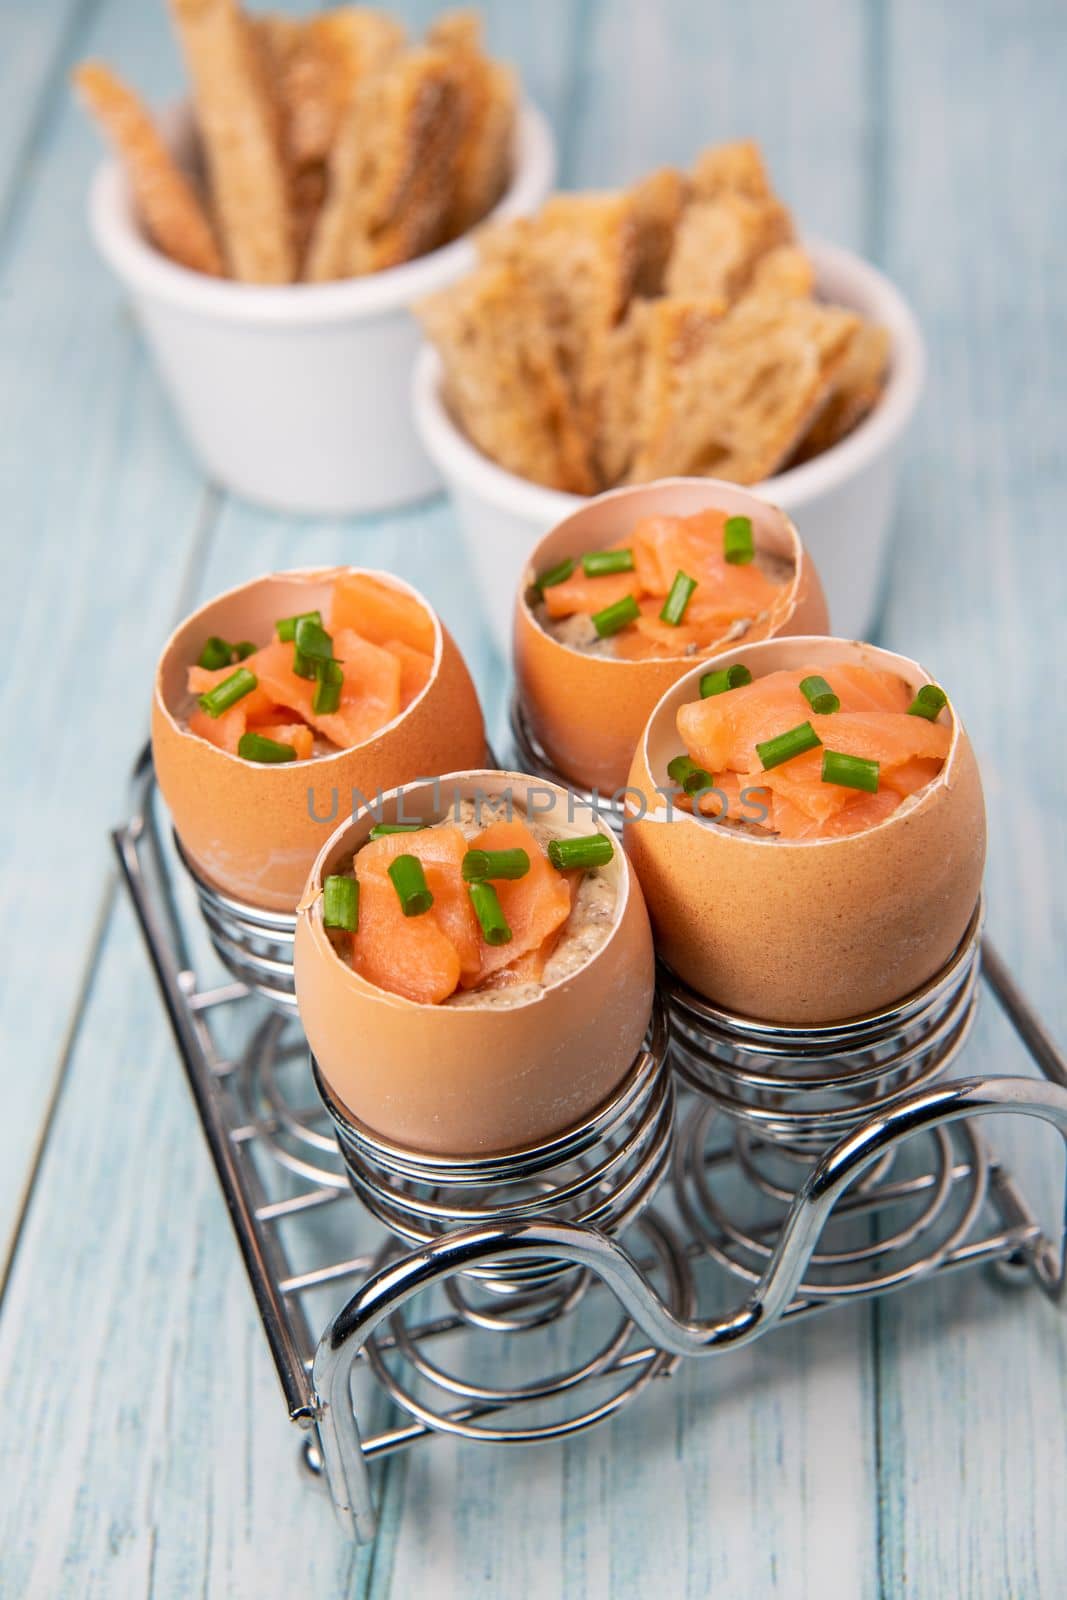 Recipe eggs casserole cooked in the shell with mushroom cream sauce and smoked salmon, High quality photo